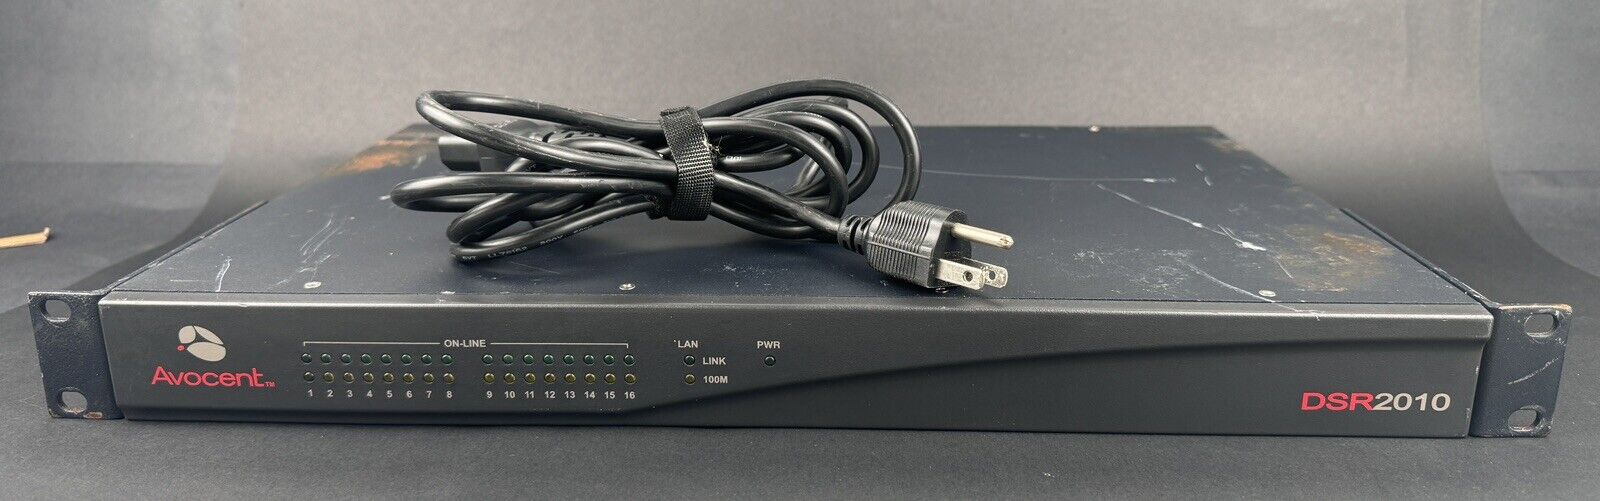 Avocent DSR2010 16-Ports External KVM switch With Remote Support Serial